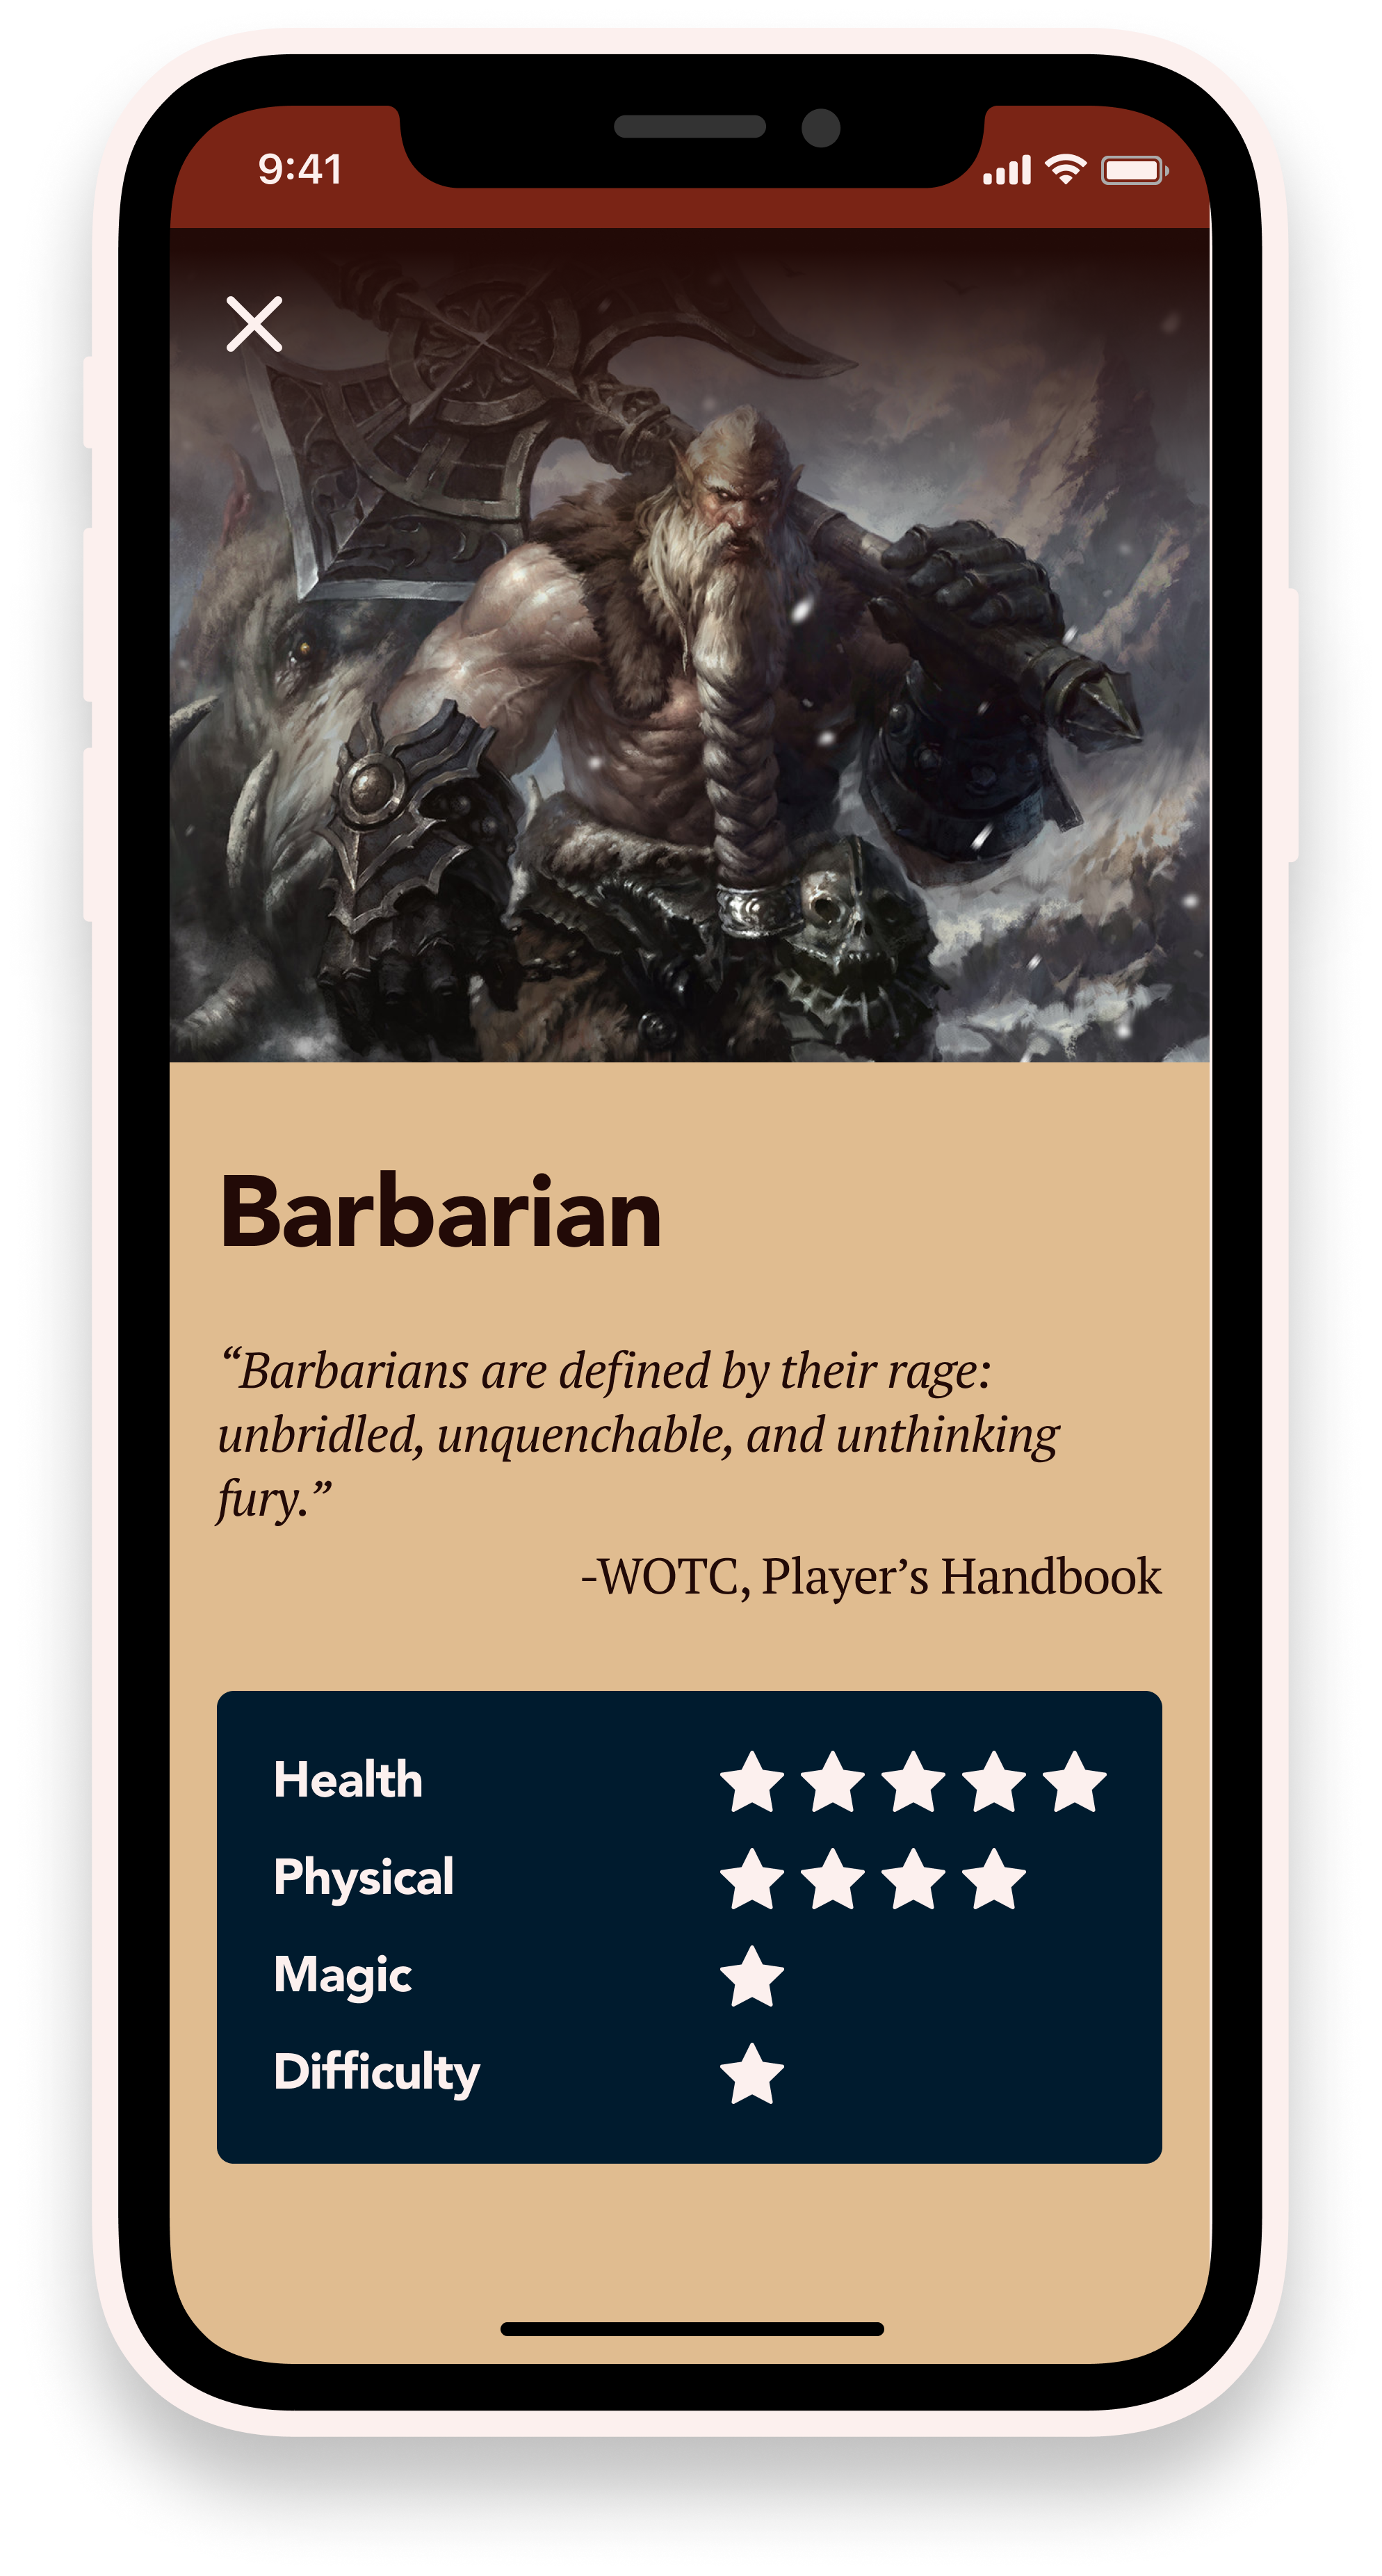 Image showing Barbarian class description with rankings on difficulty, health, and magic